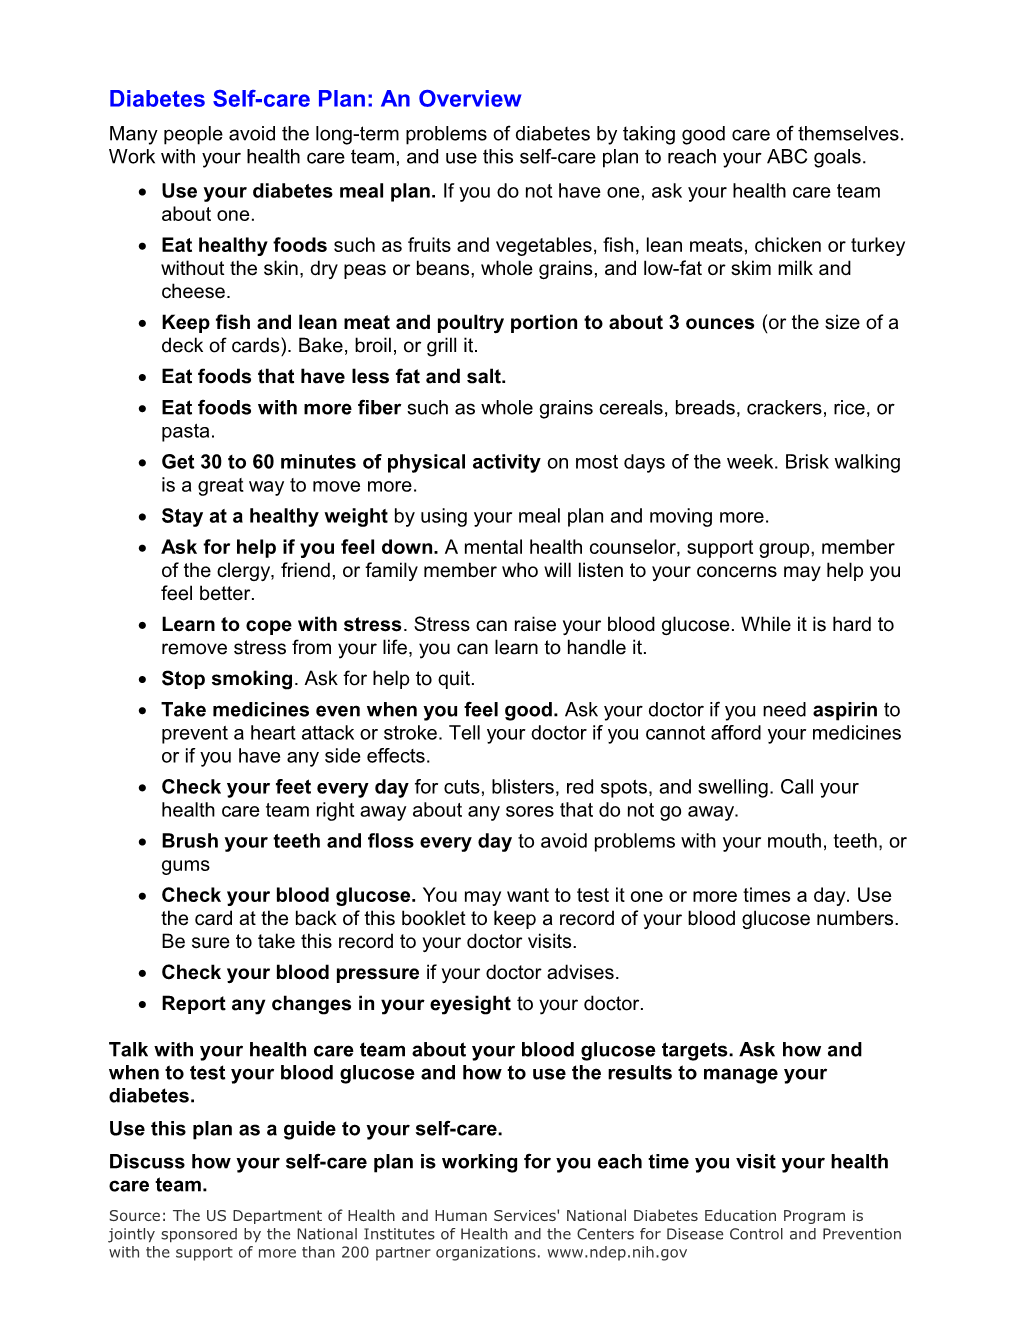 Diabetes Self-Care Plan: an Overview